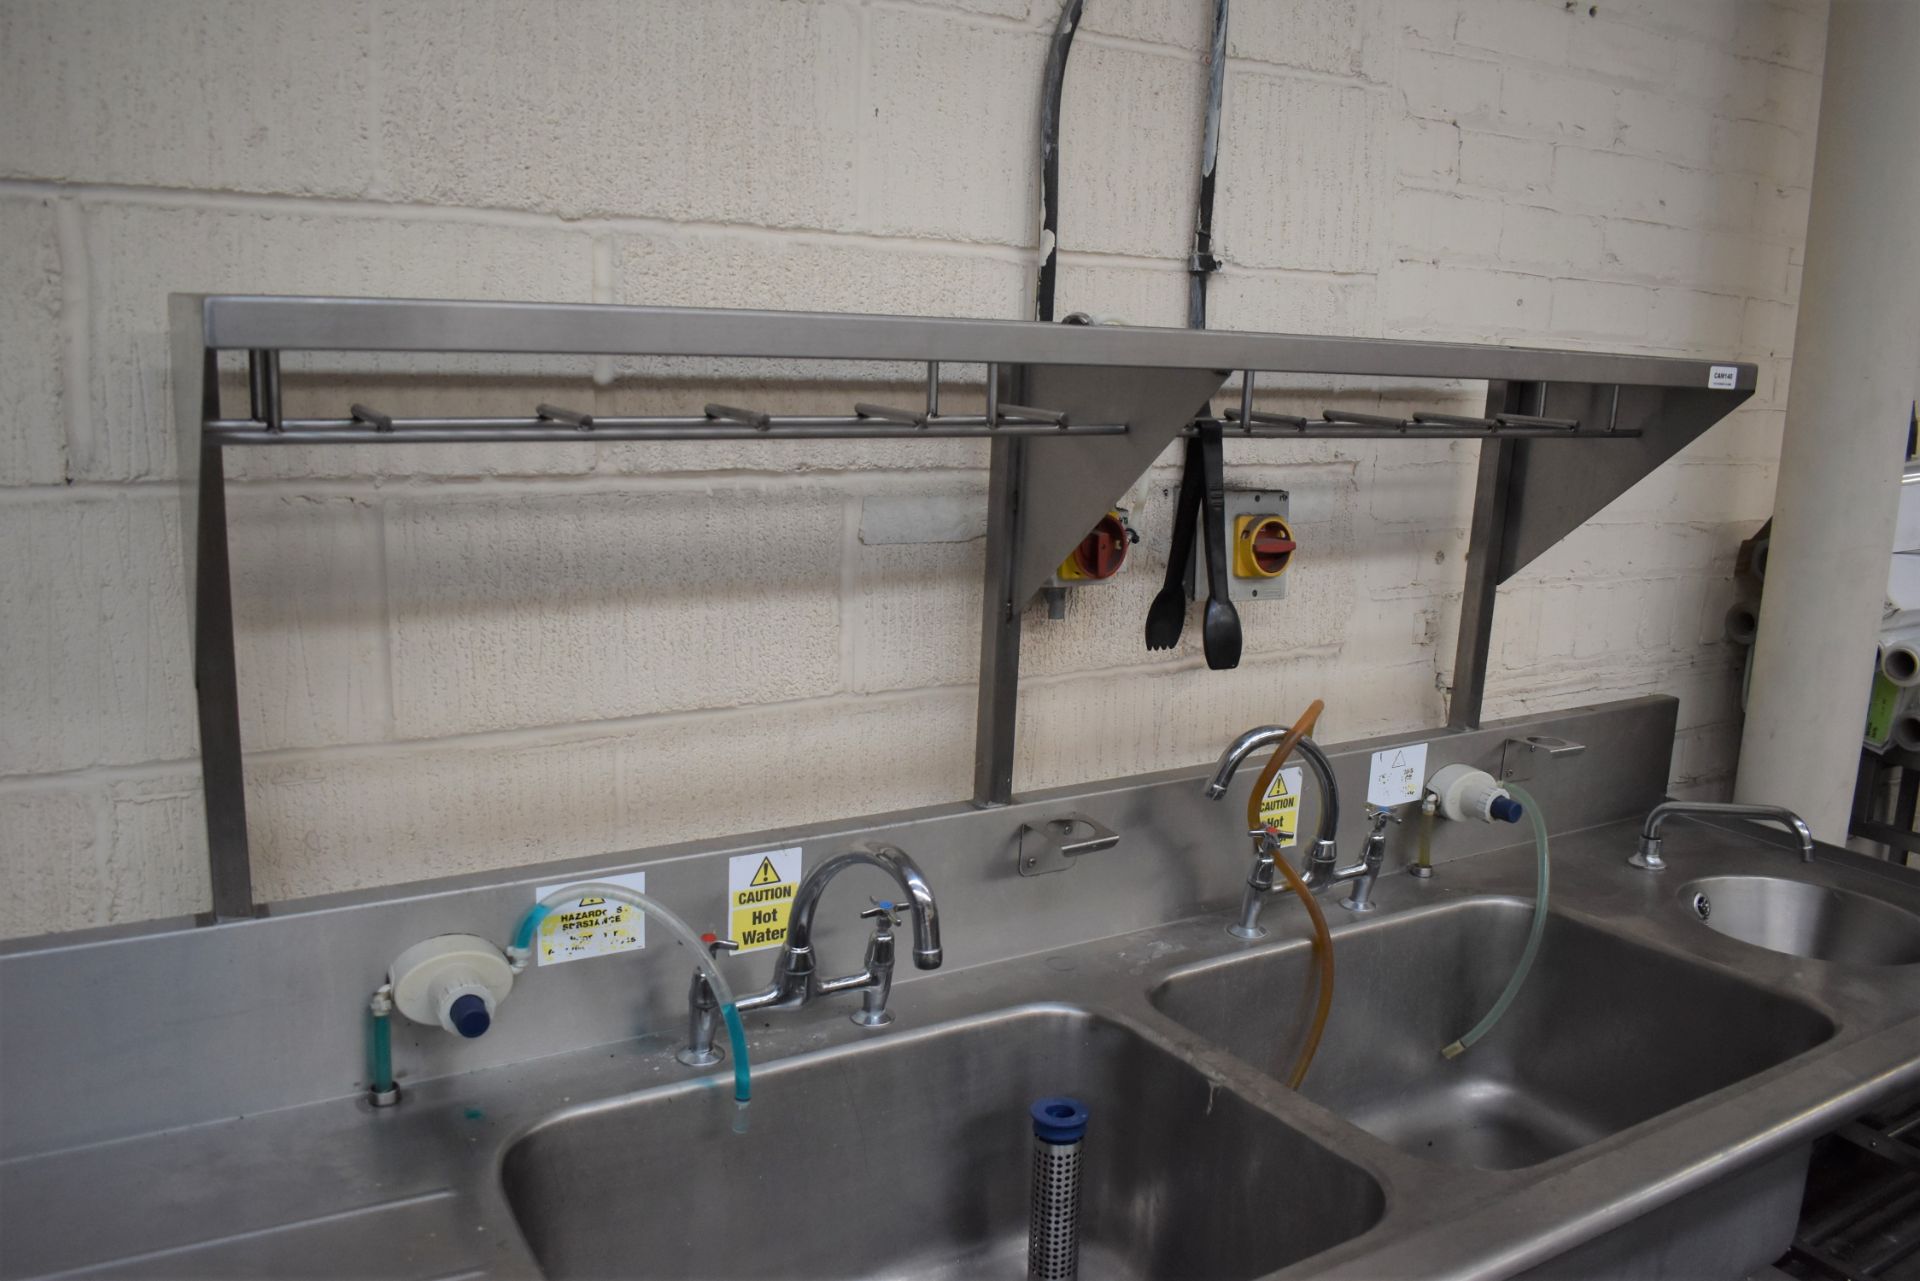 1 x Stainless Steel Commercial Wash Basin Unit With Twin Sink Bowl, Mixer Taps, Undershelf, - Image 8 of 8